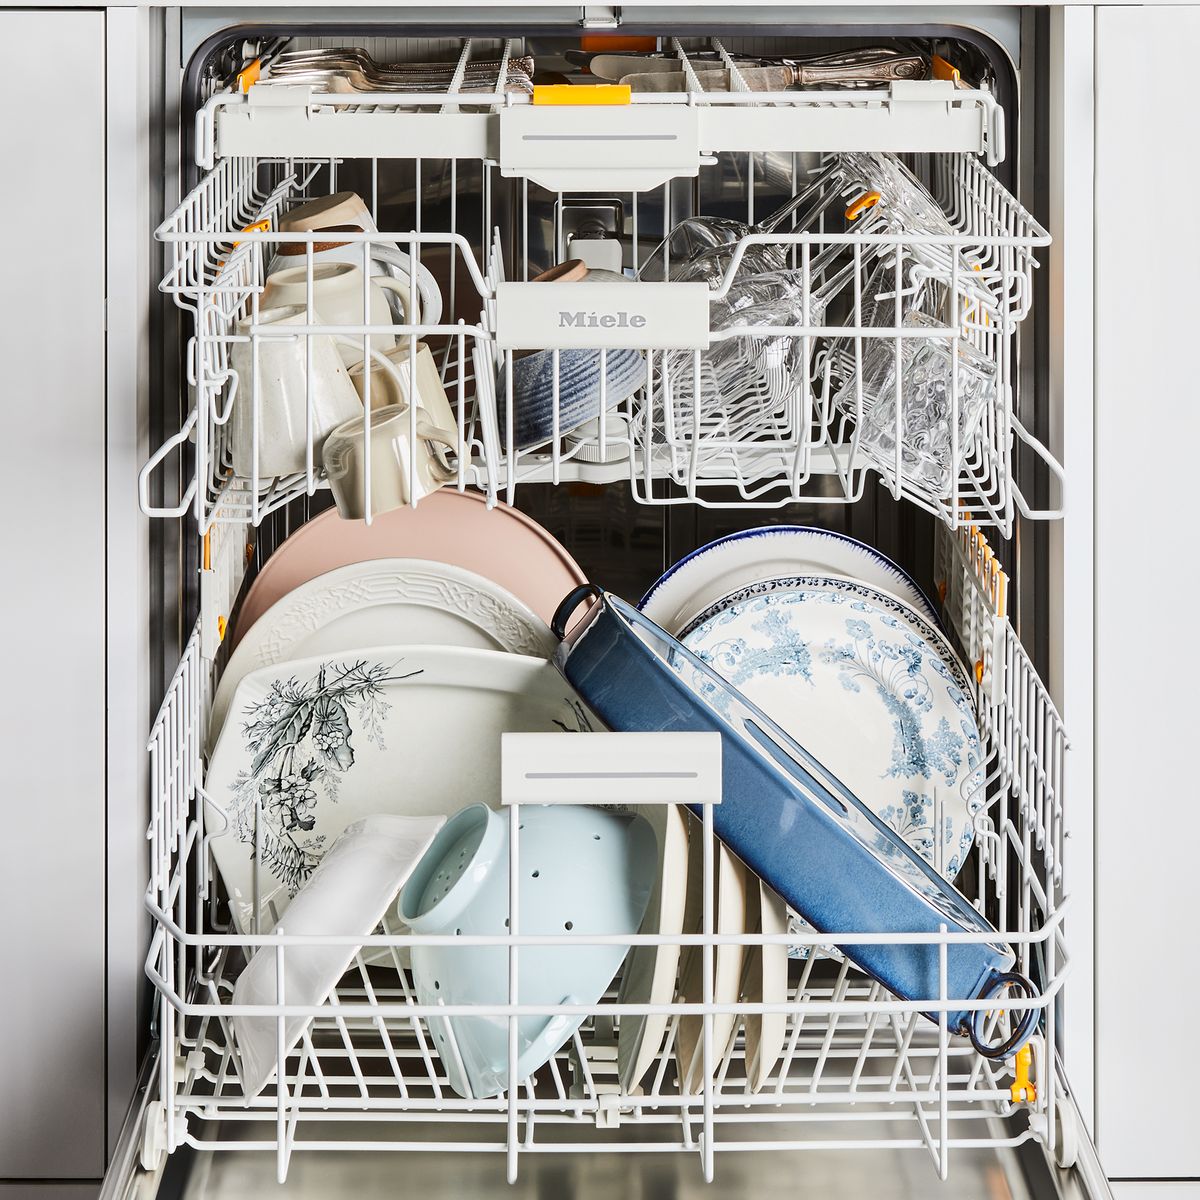 How to Clean Your Dishwasher - Easy Dishwasher Cleaning Guide